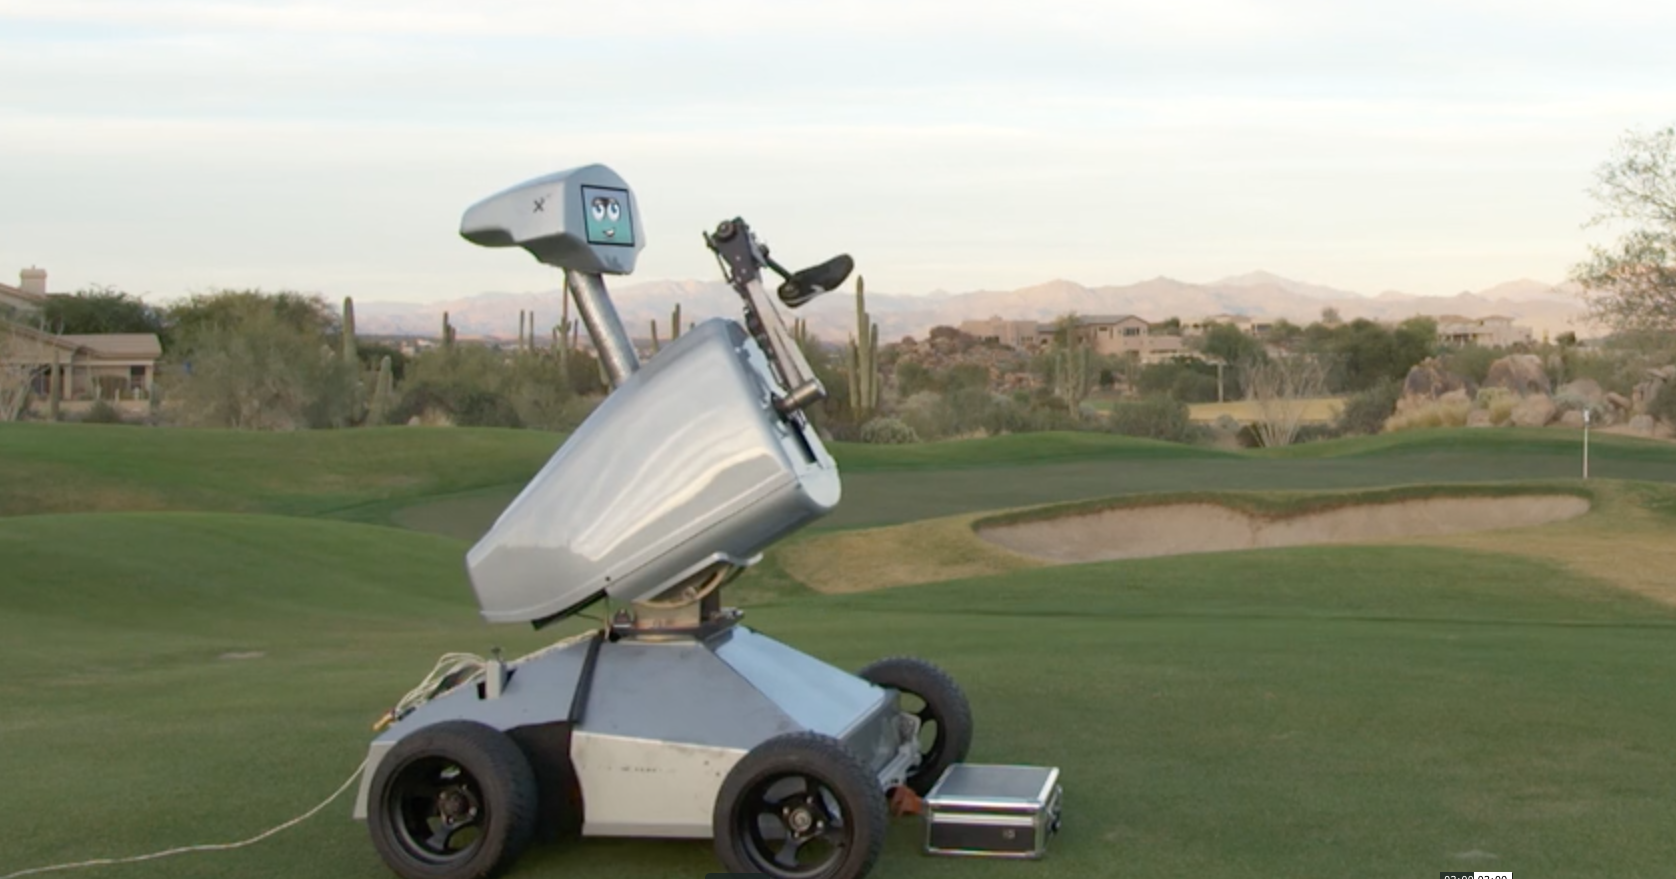 Golf robot LDRIC sinks a hole-in-one at PGA event - CBS News